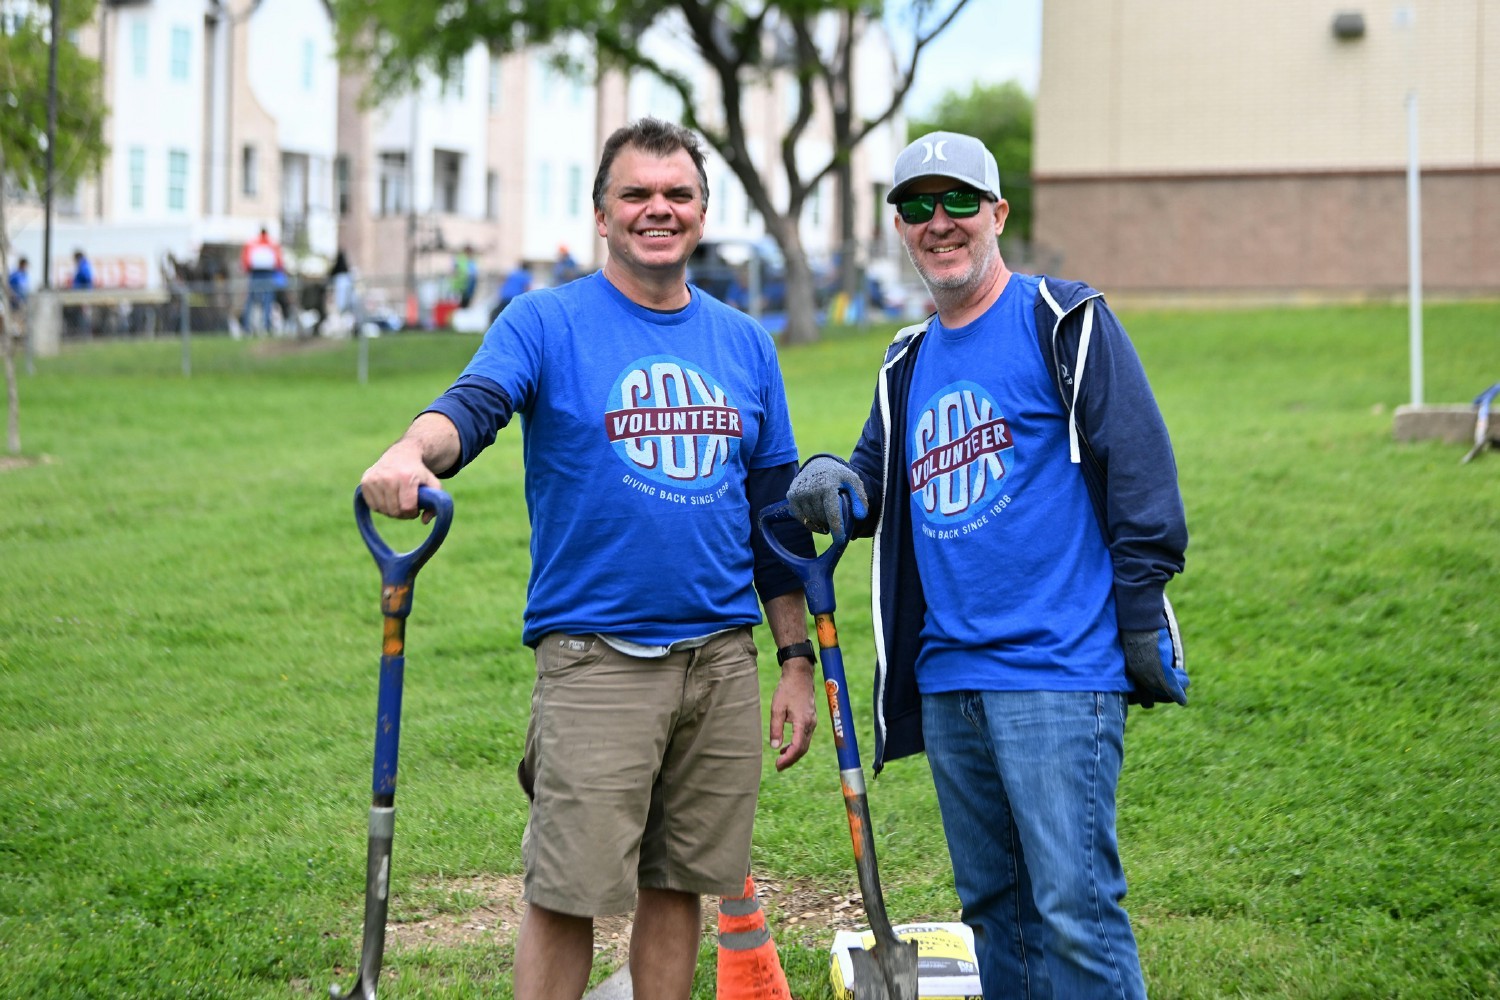 Giving back is a vital part of our culture. Cox employees receive paid volunteer hours and opportunities to give back.